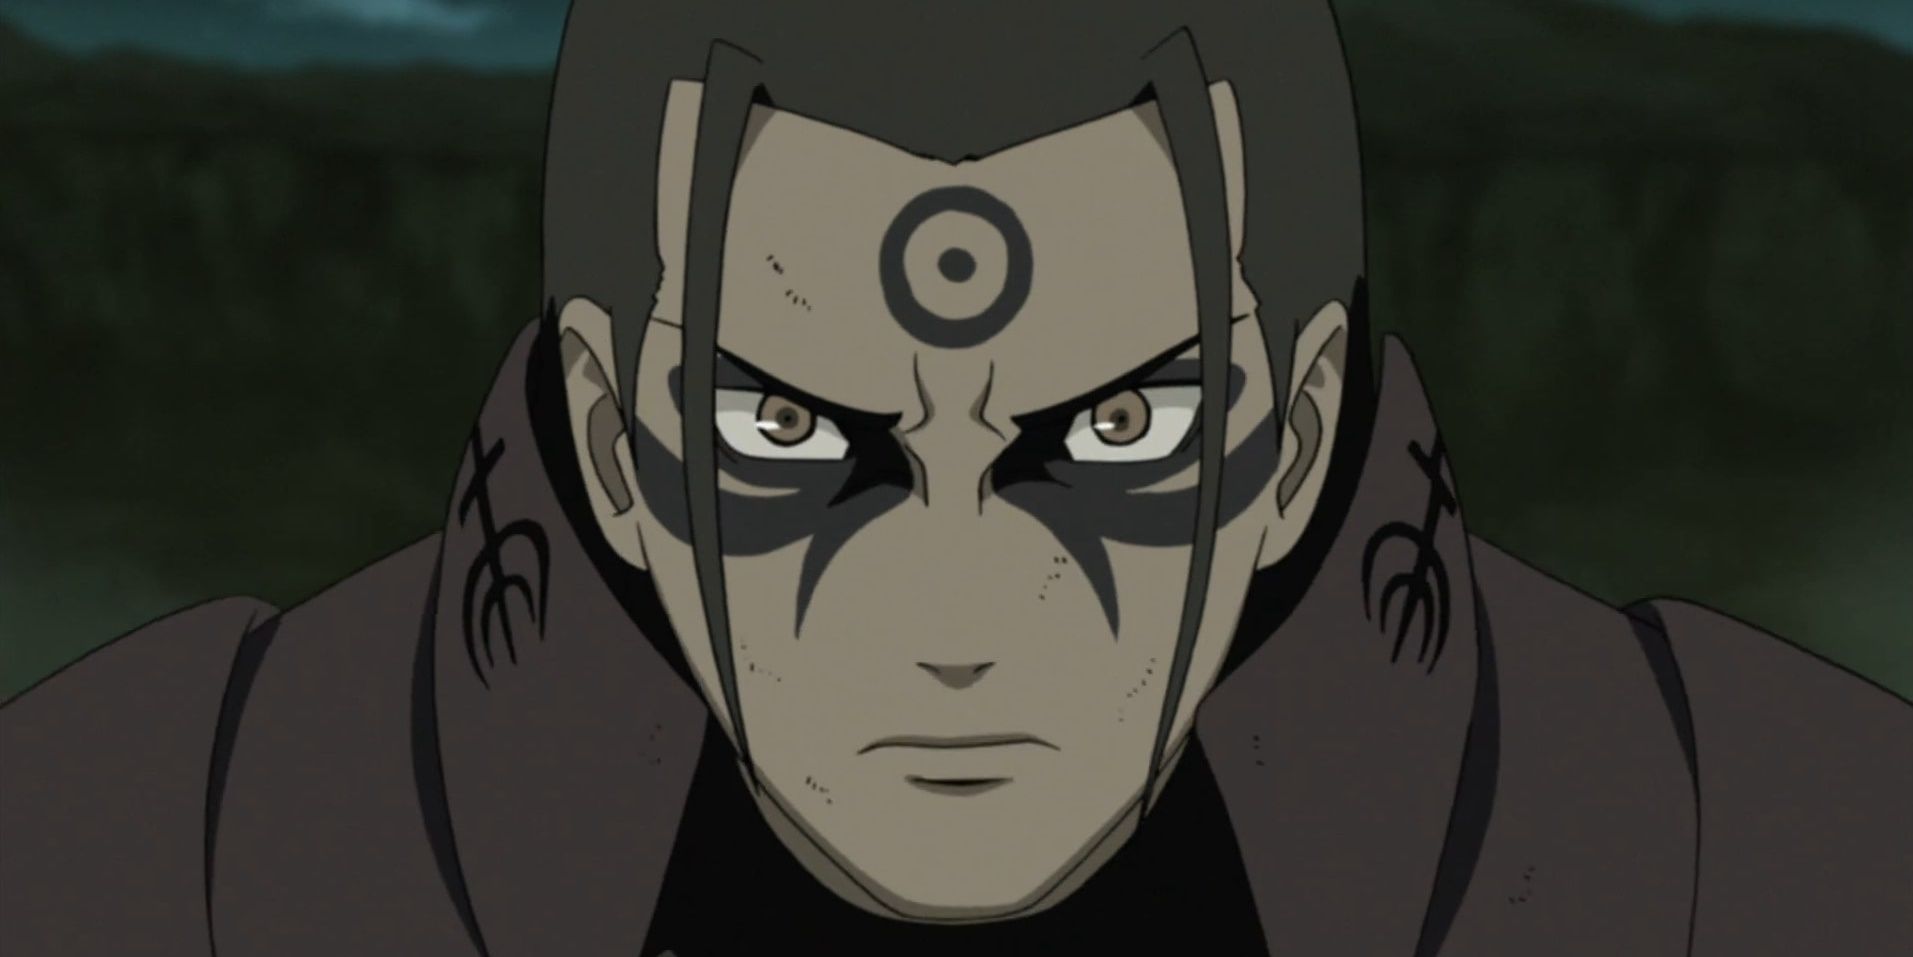 Hashirama Senju from Naruto Shipuuden looks straight at the camera with a stern expression.